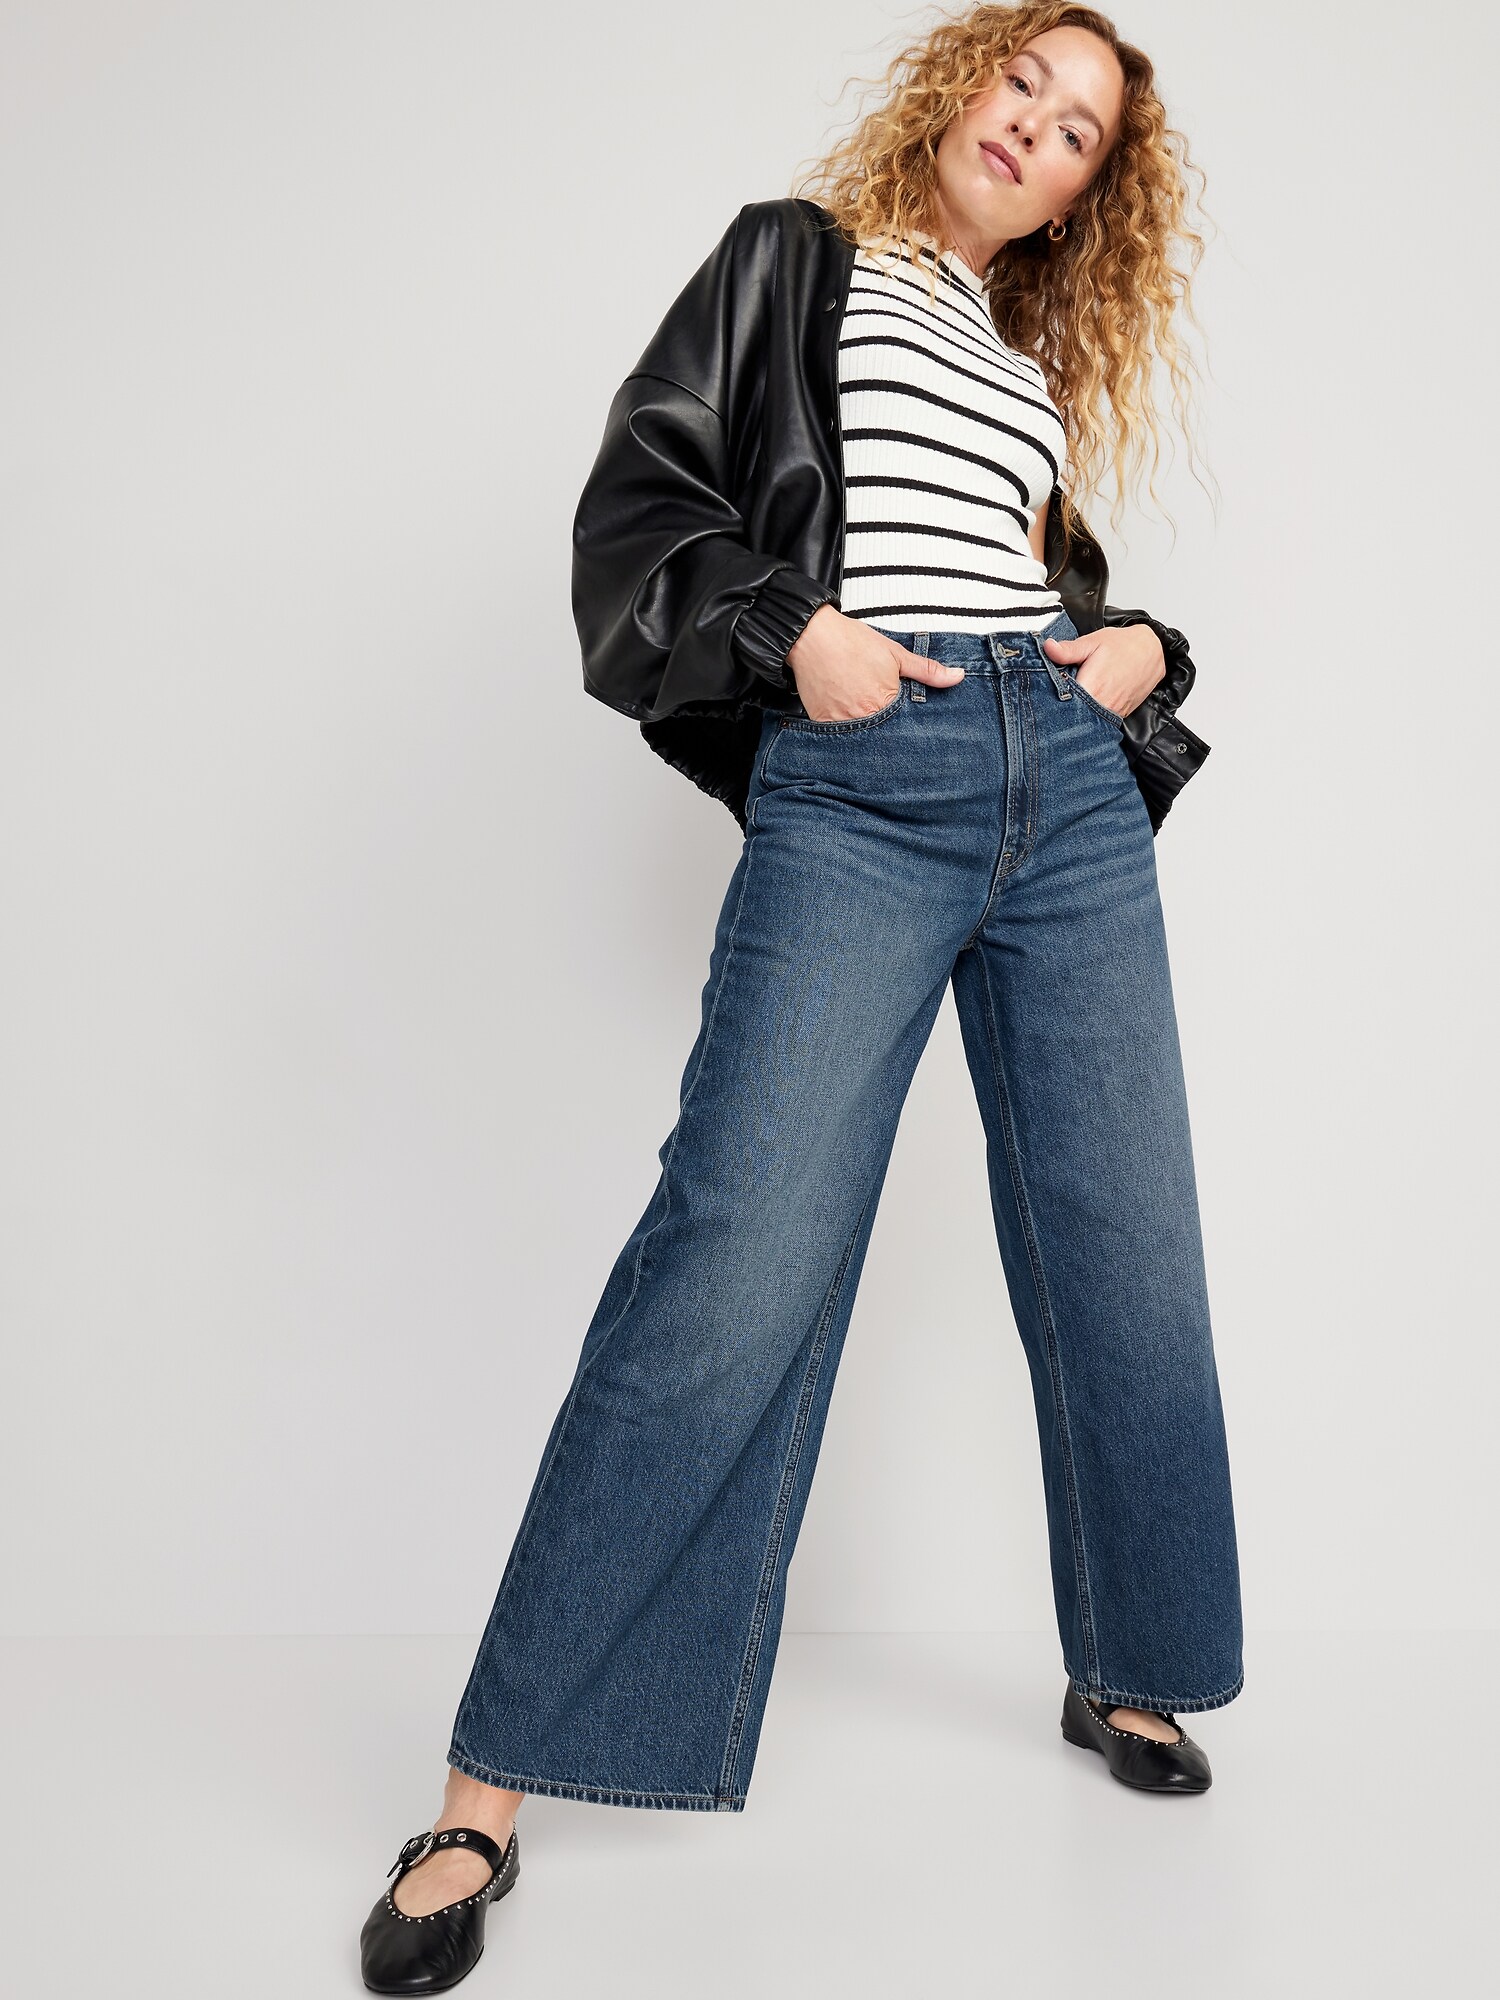 Extra High-Waisted Baggy Wide-Leg Non-Stretch Jeans for Women | Old Navy